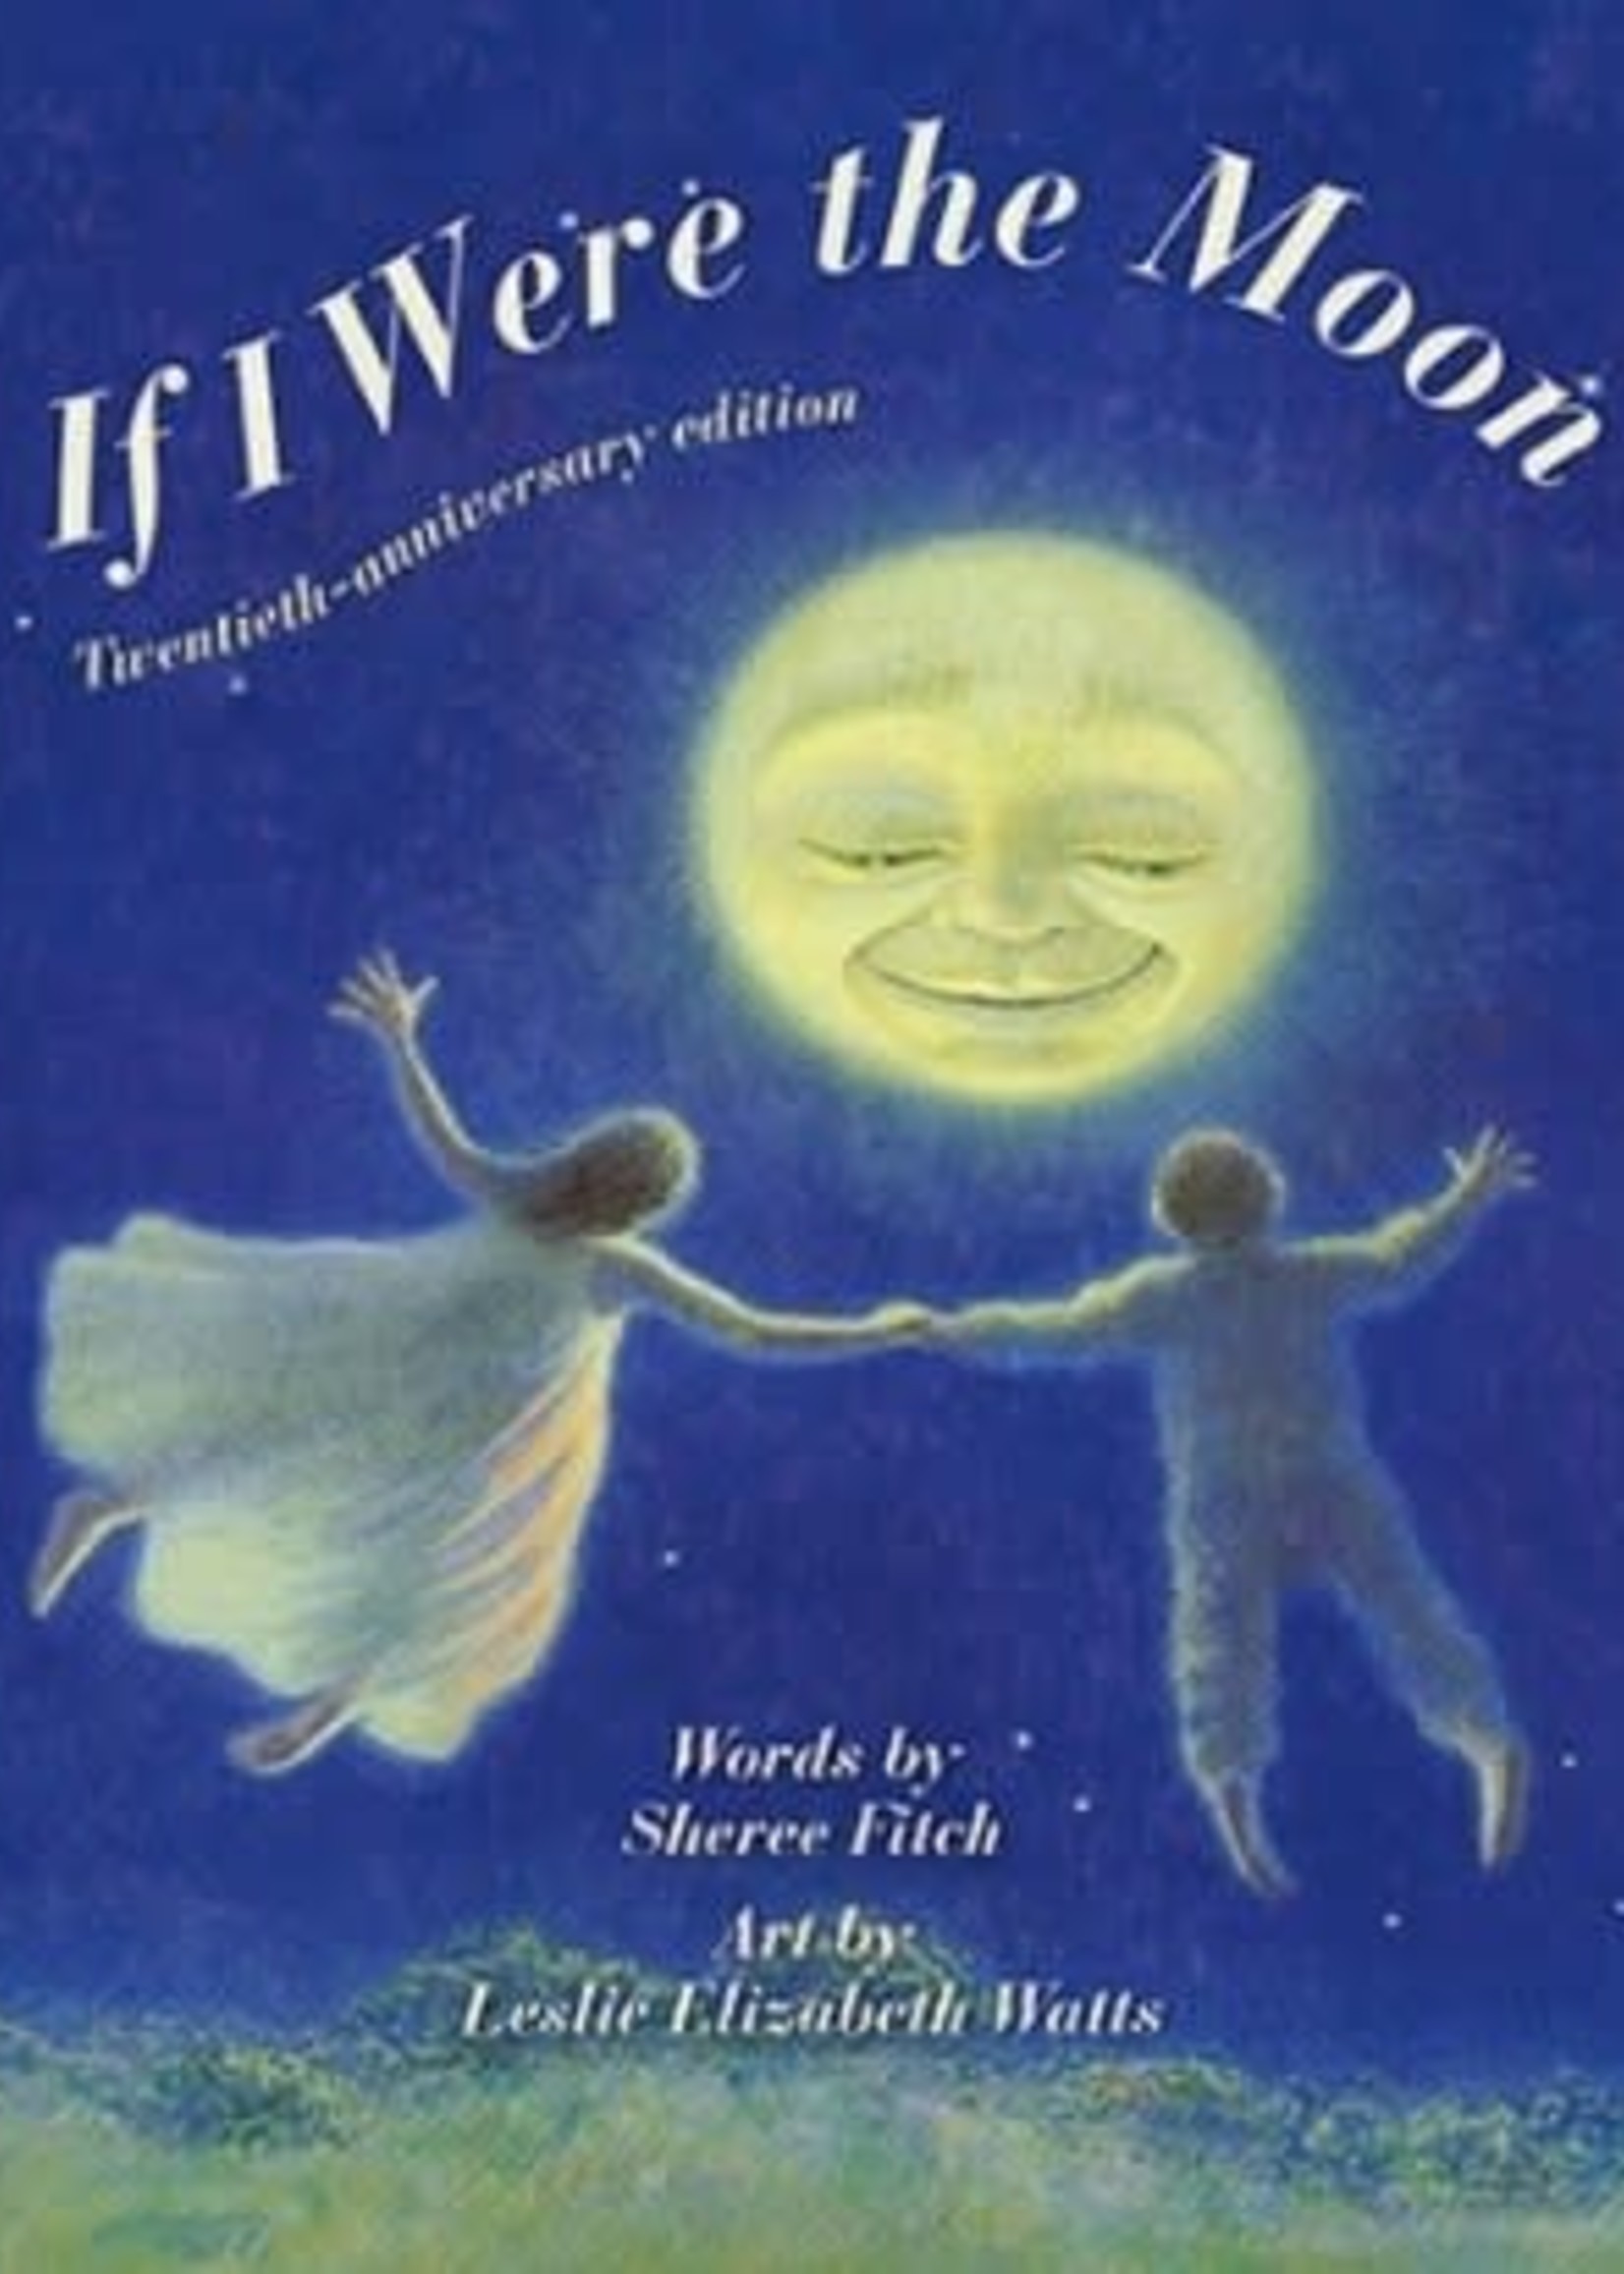 If I Were the Moon: Twentieth - Anniversary Edition by Sheree Fitch